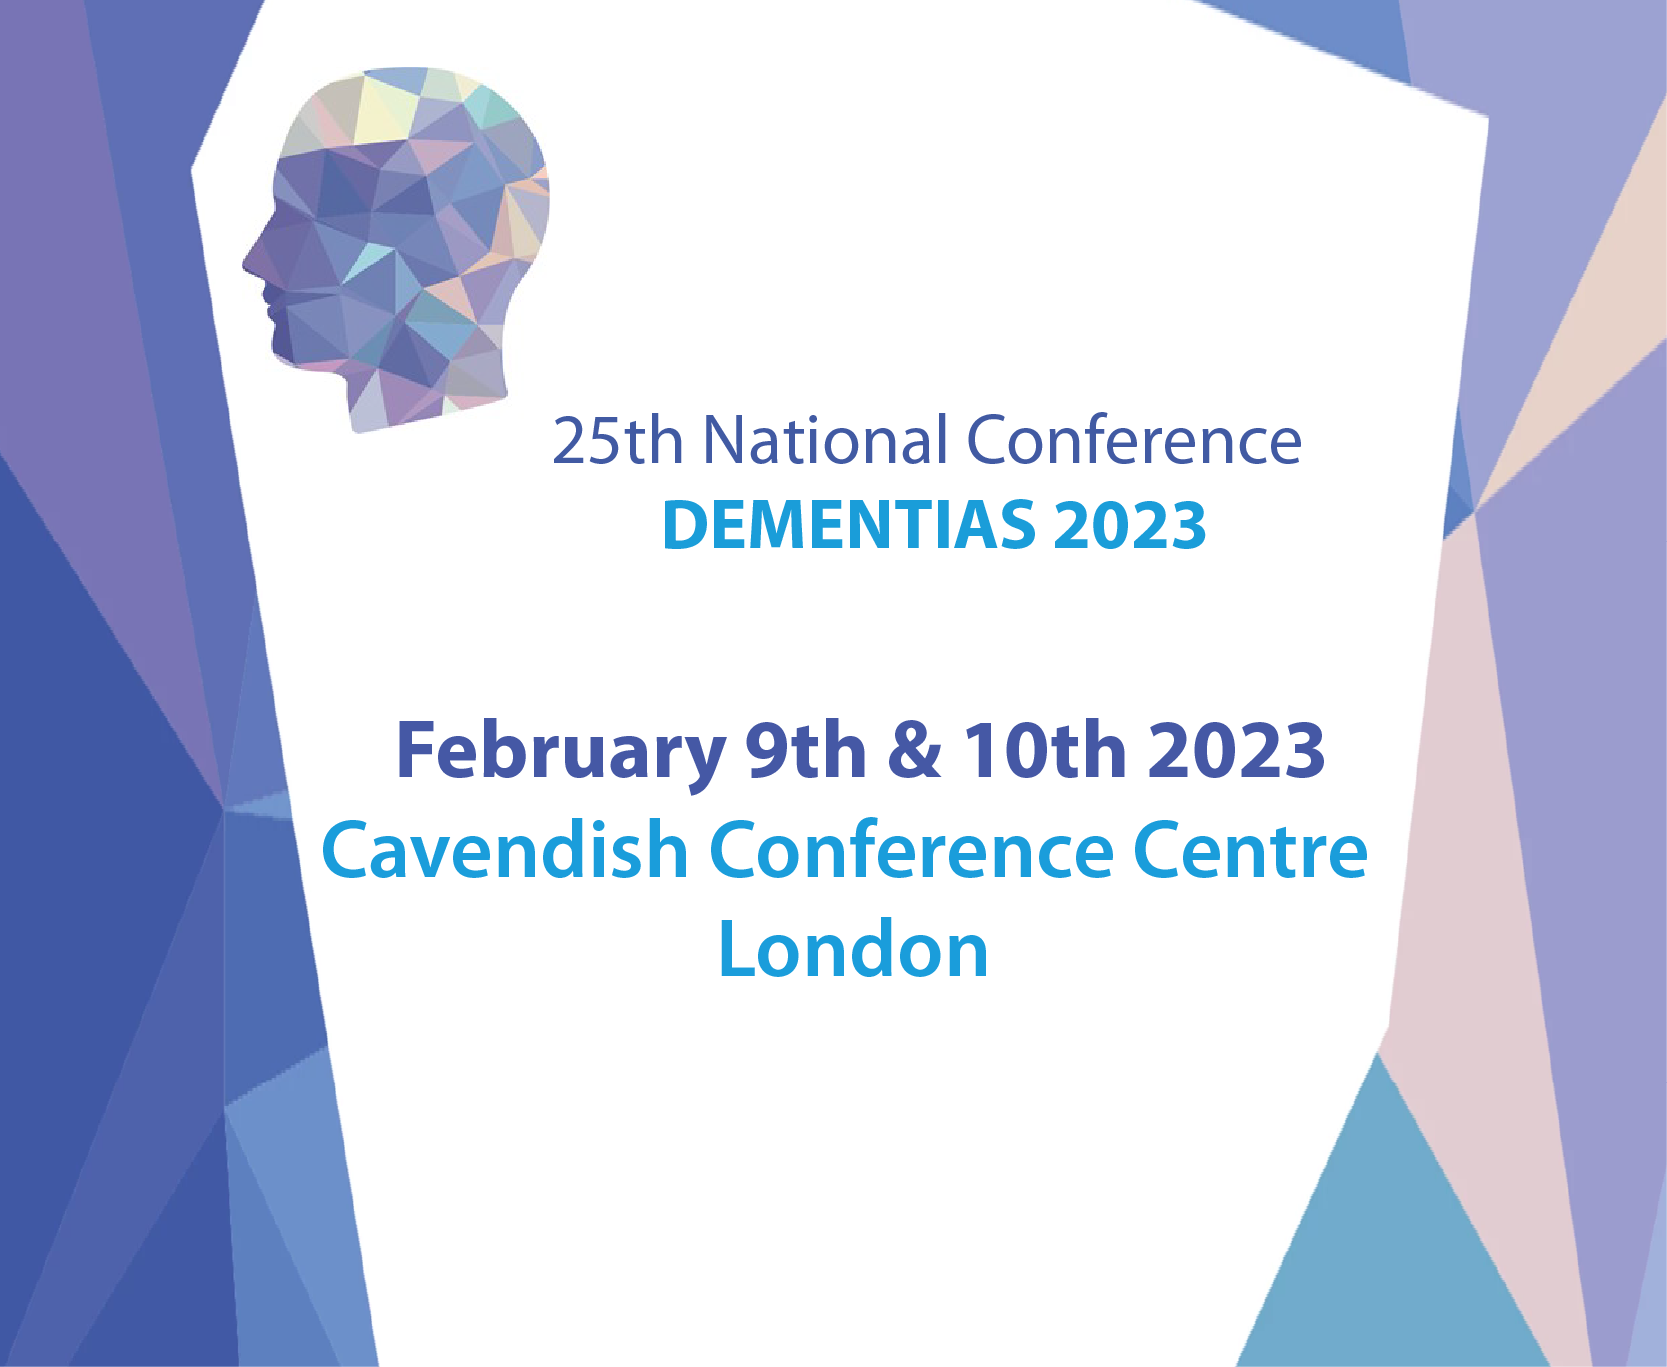 25th National Conference Dementias 2023